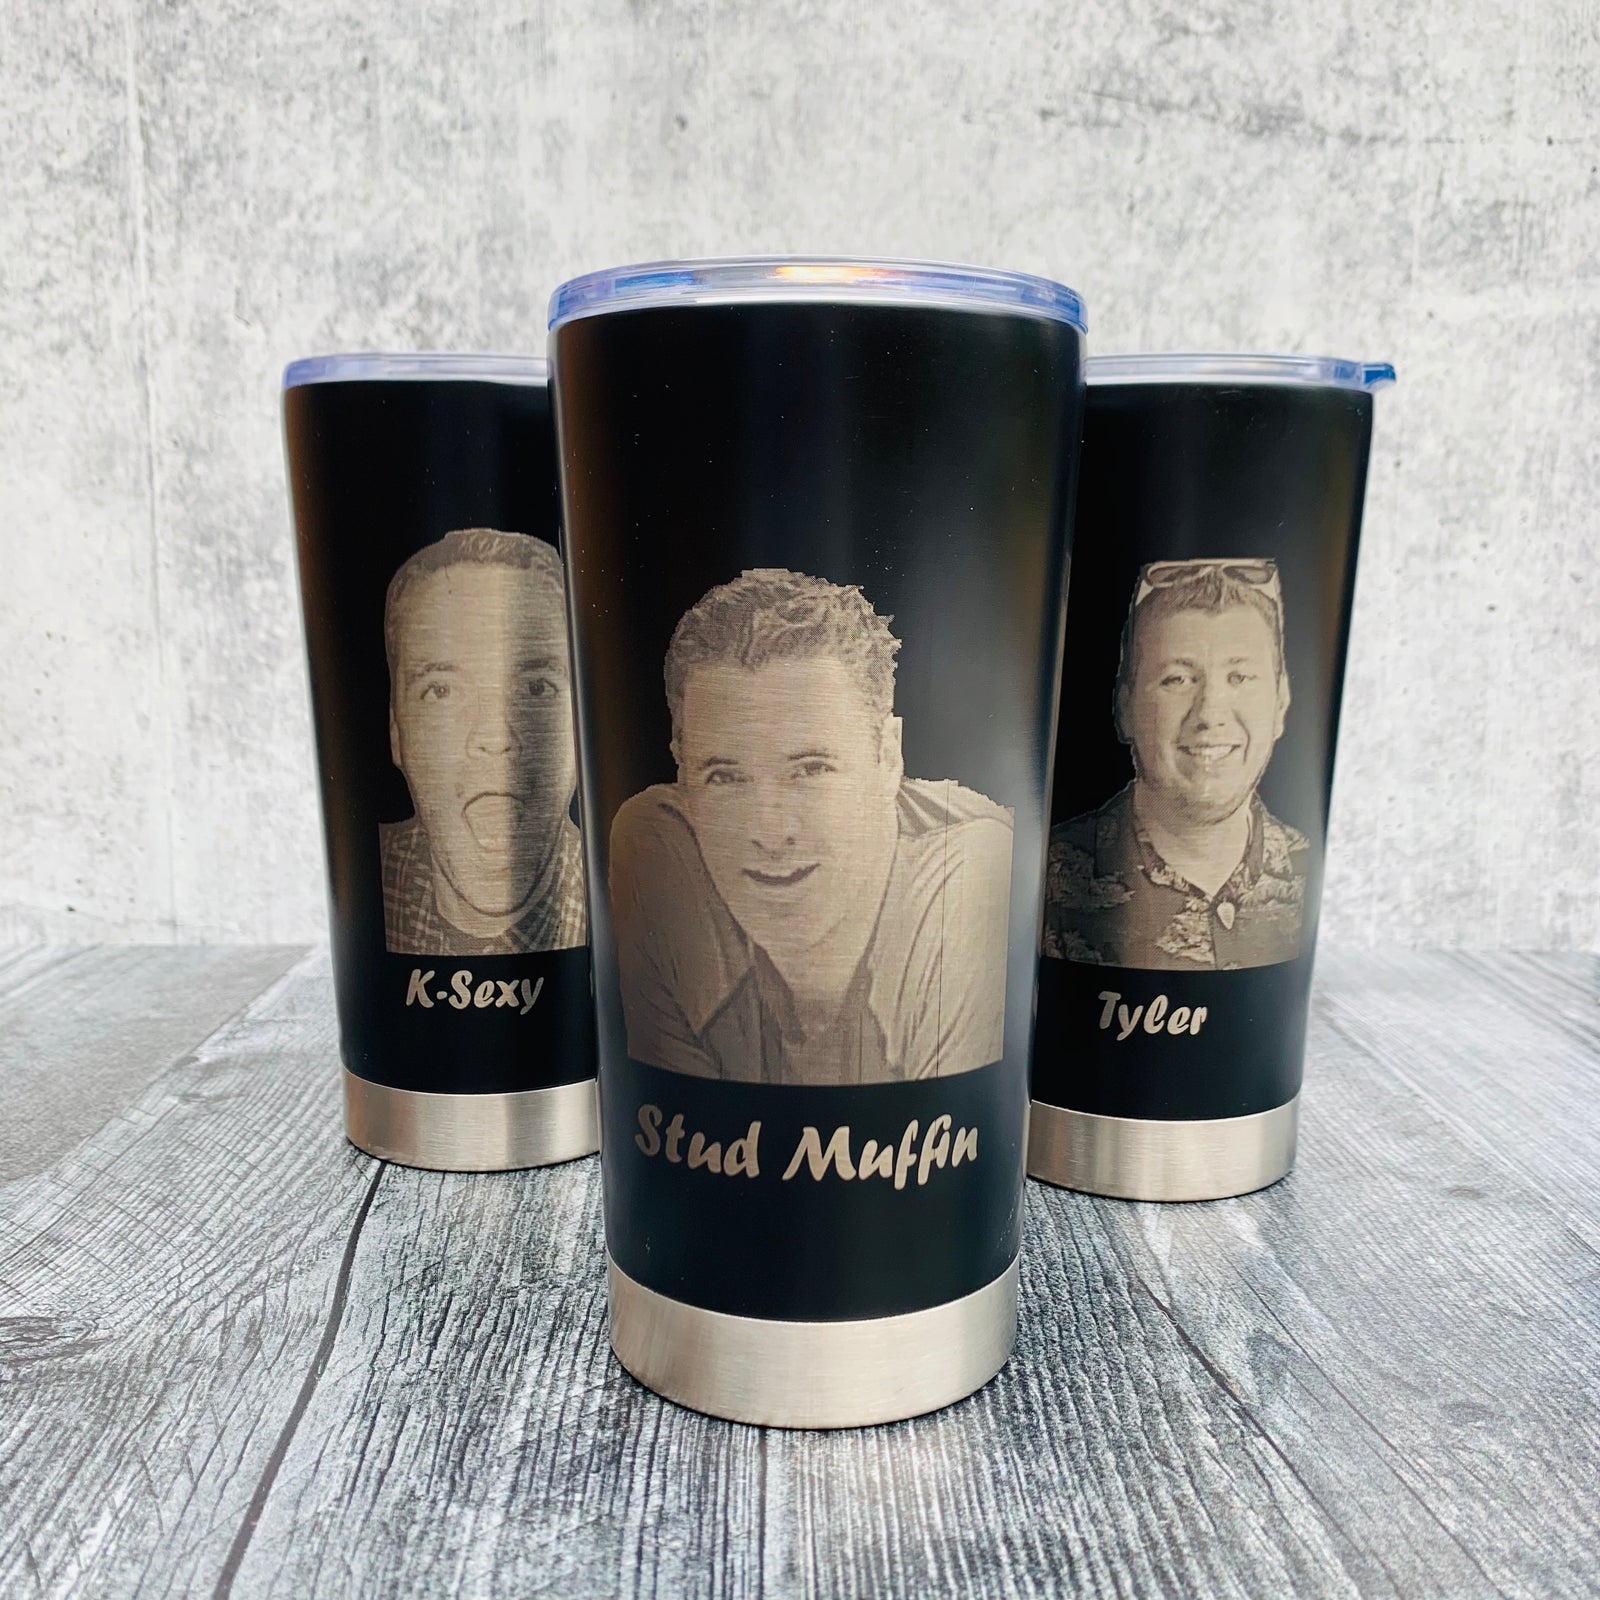 Gooin Global Customized Photo Personalized Gifts for Men Who Have